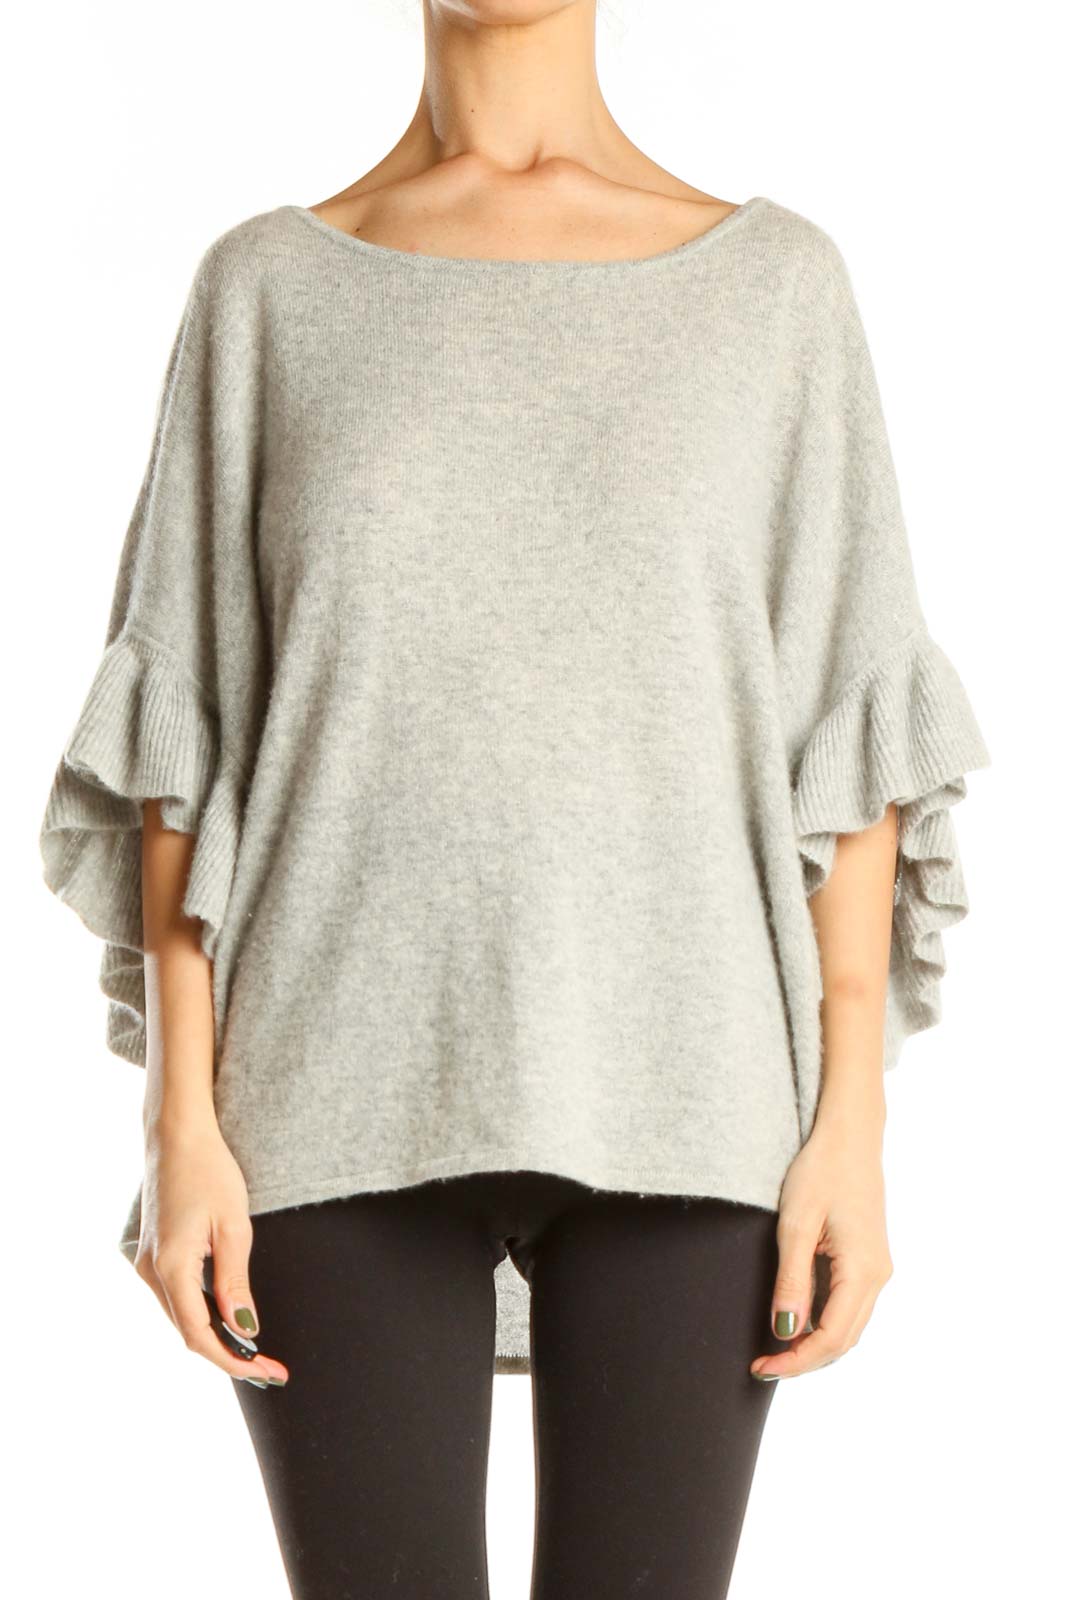 Gray Brunch Top with Ruffle Detail Front